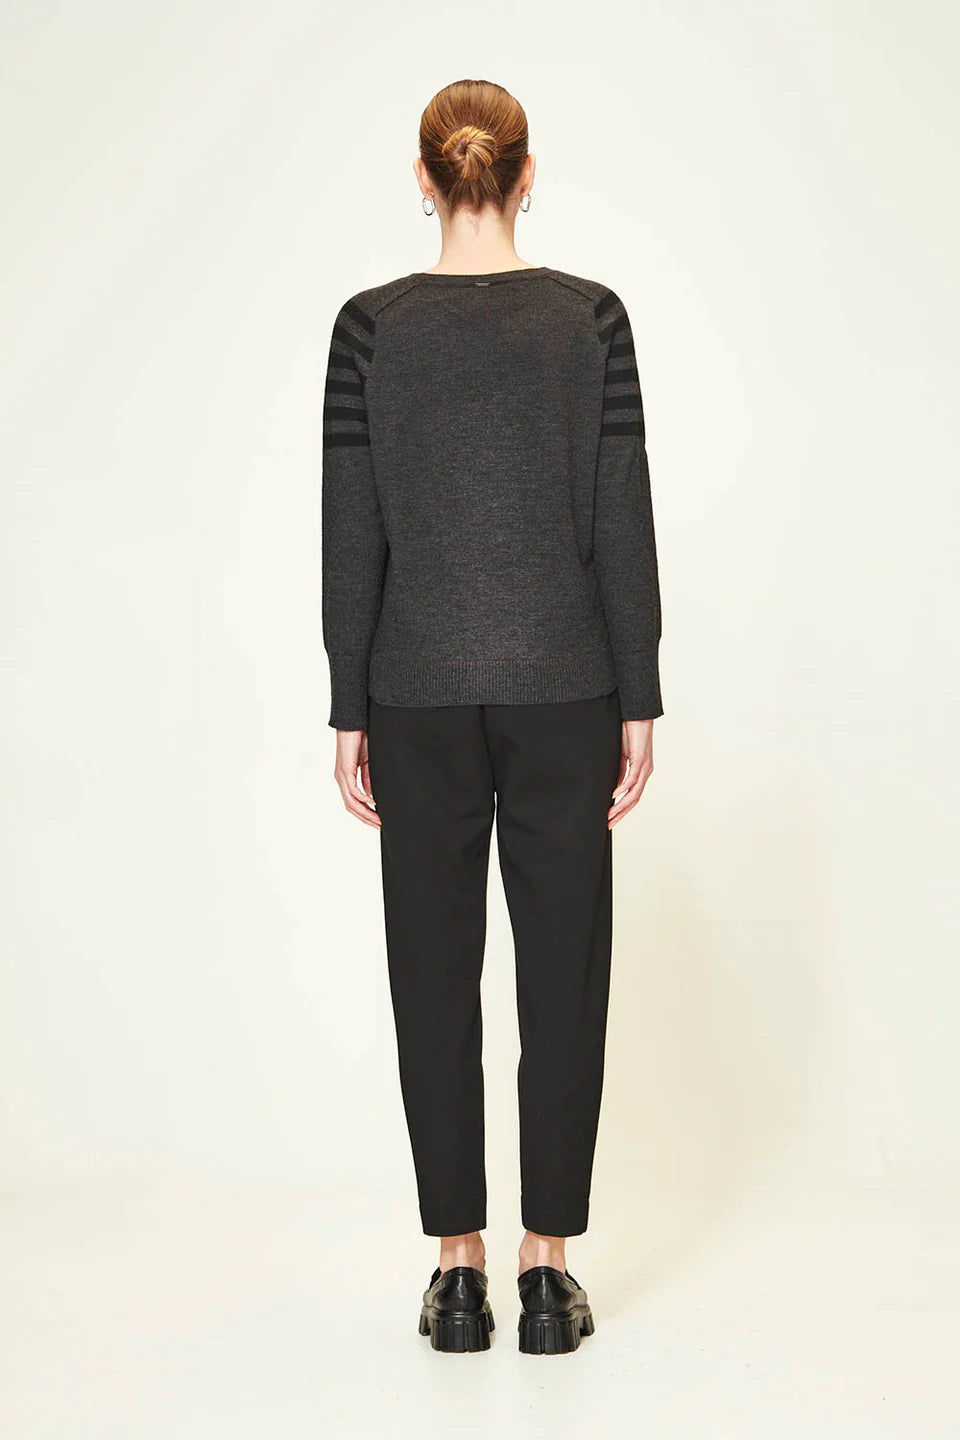 Verge Flynn Sweater Charcoal Marle